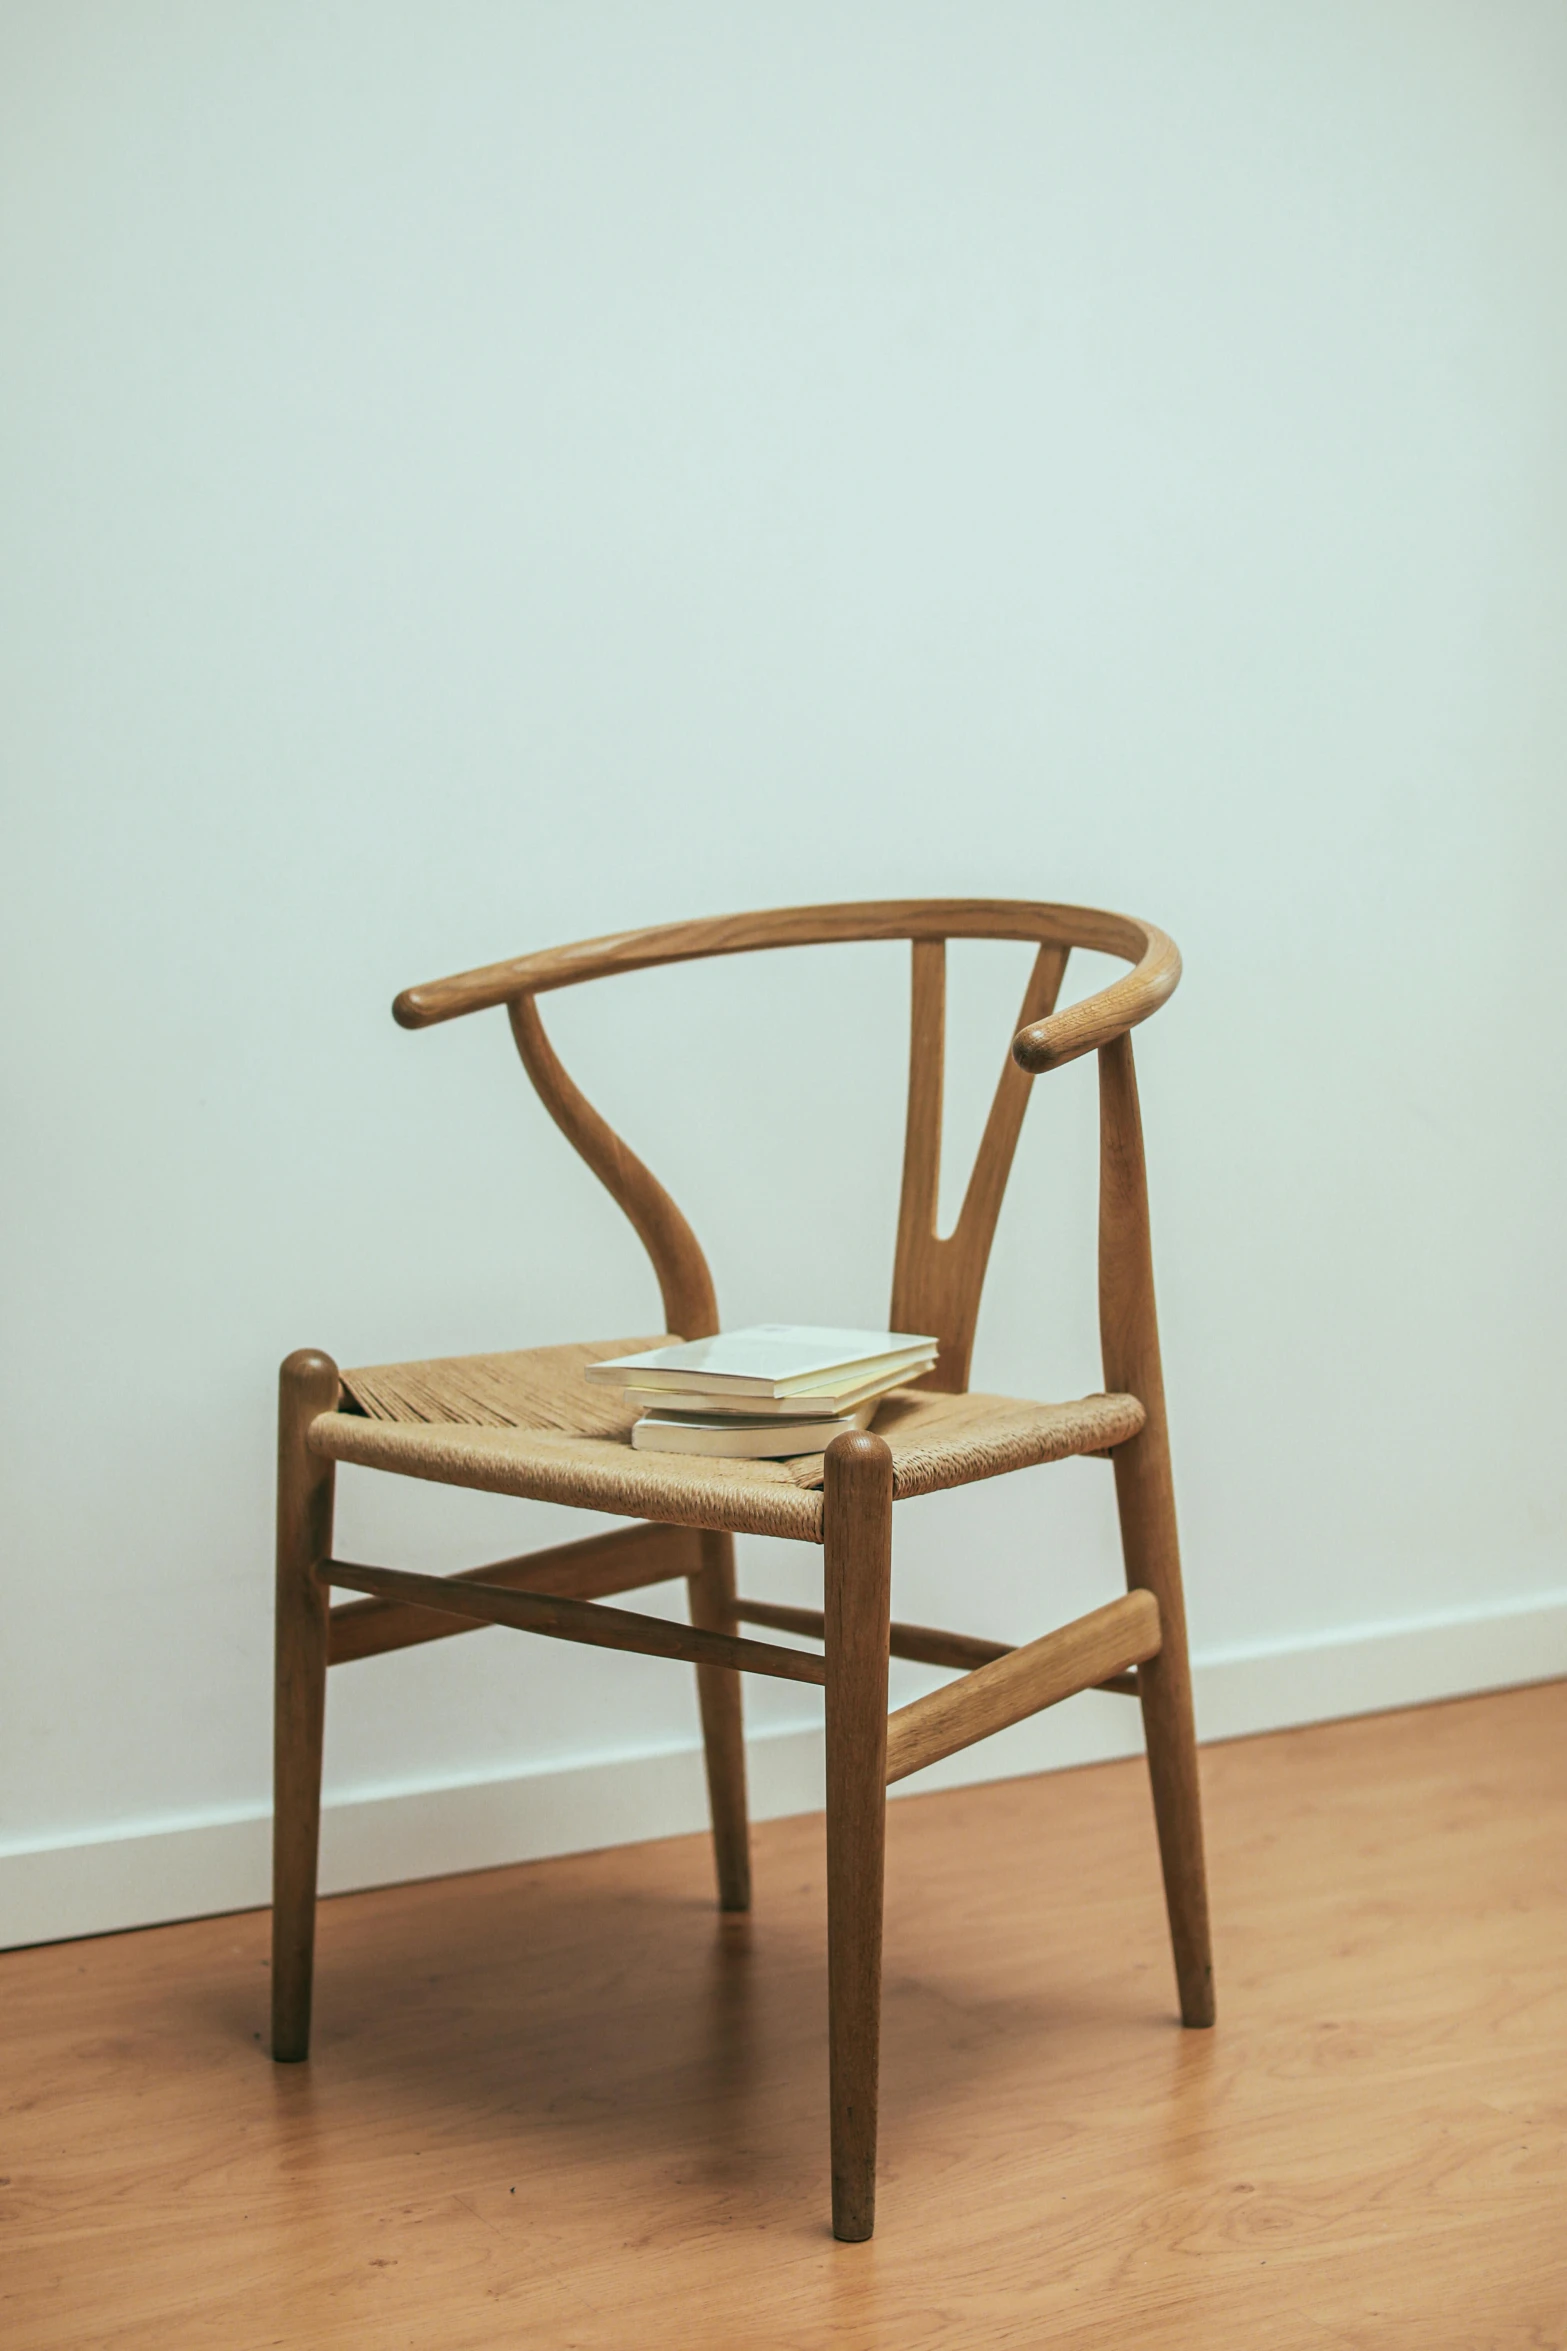 a wooden chair sitting on top of a hard wood floor, inspired by Constantin Hansen, pexels contest winner, thin antlers, reading, são paulo, plain background